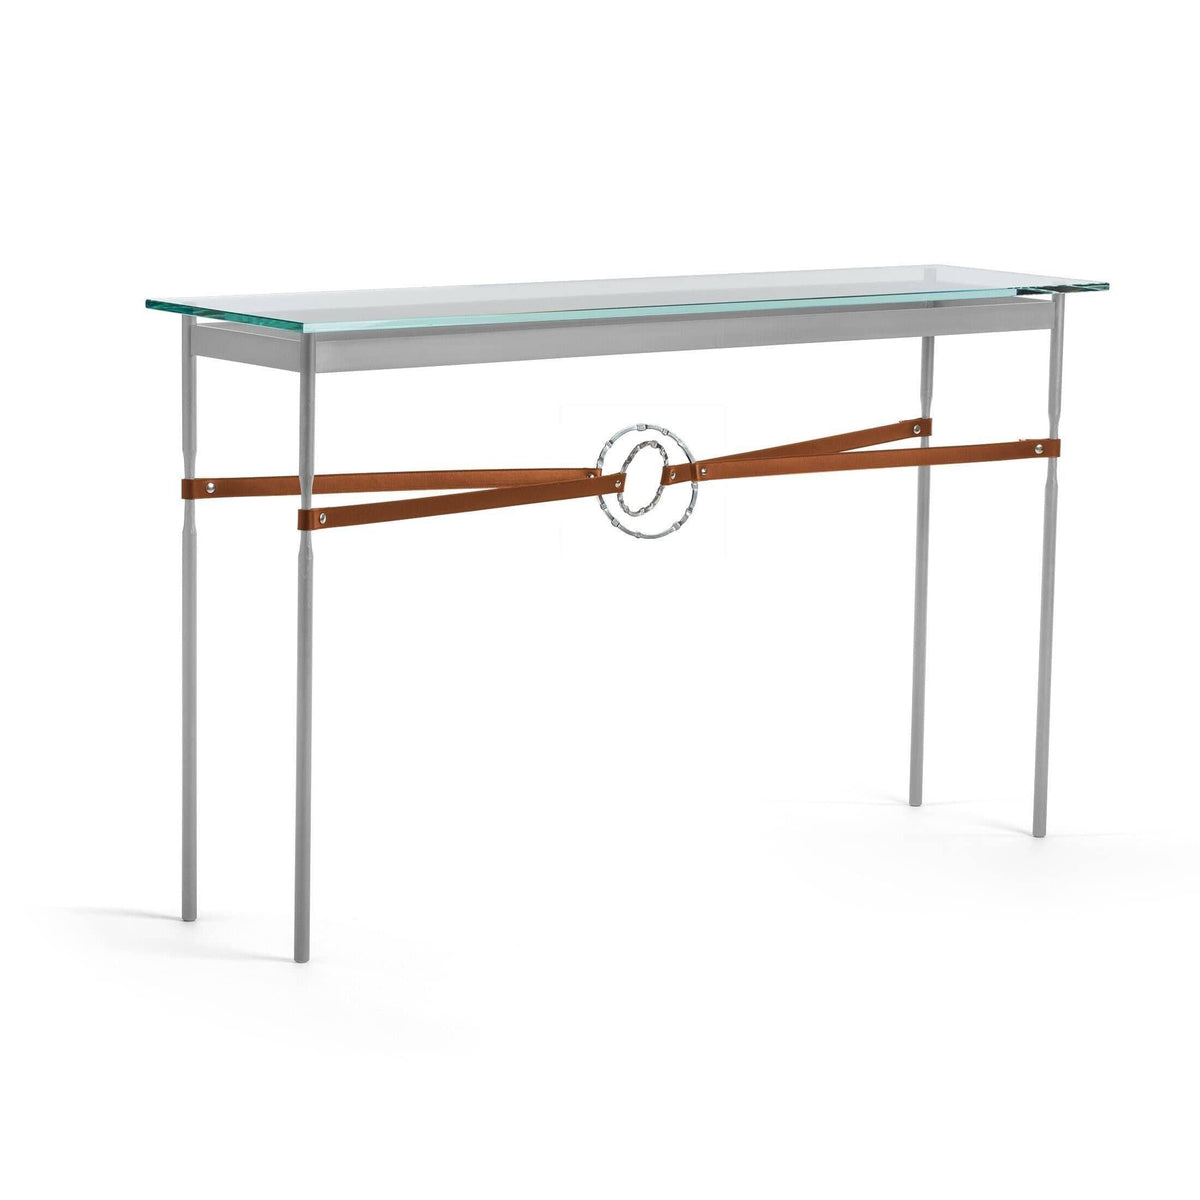 Hubbardton Forge - Equus Chestnut Leather Console Table - 750118-82-85-LC-VA0714 | Montreal Lighting & Hardware